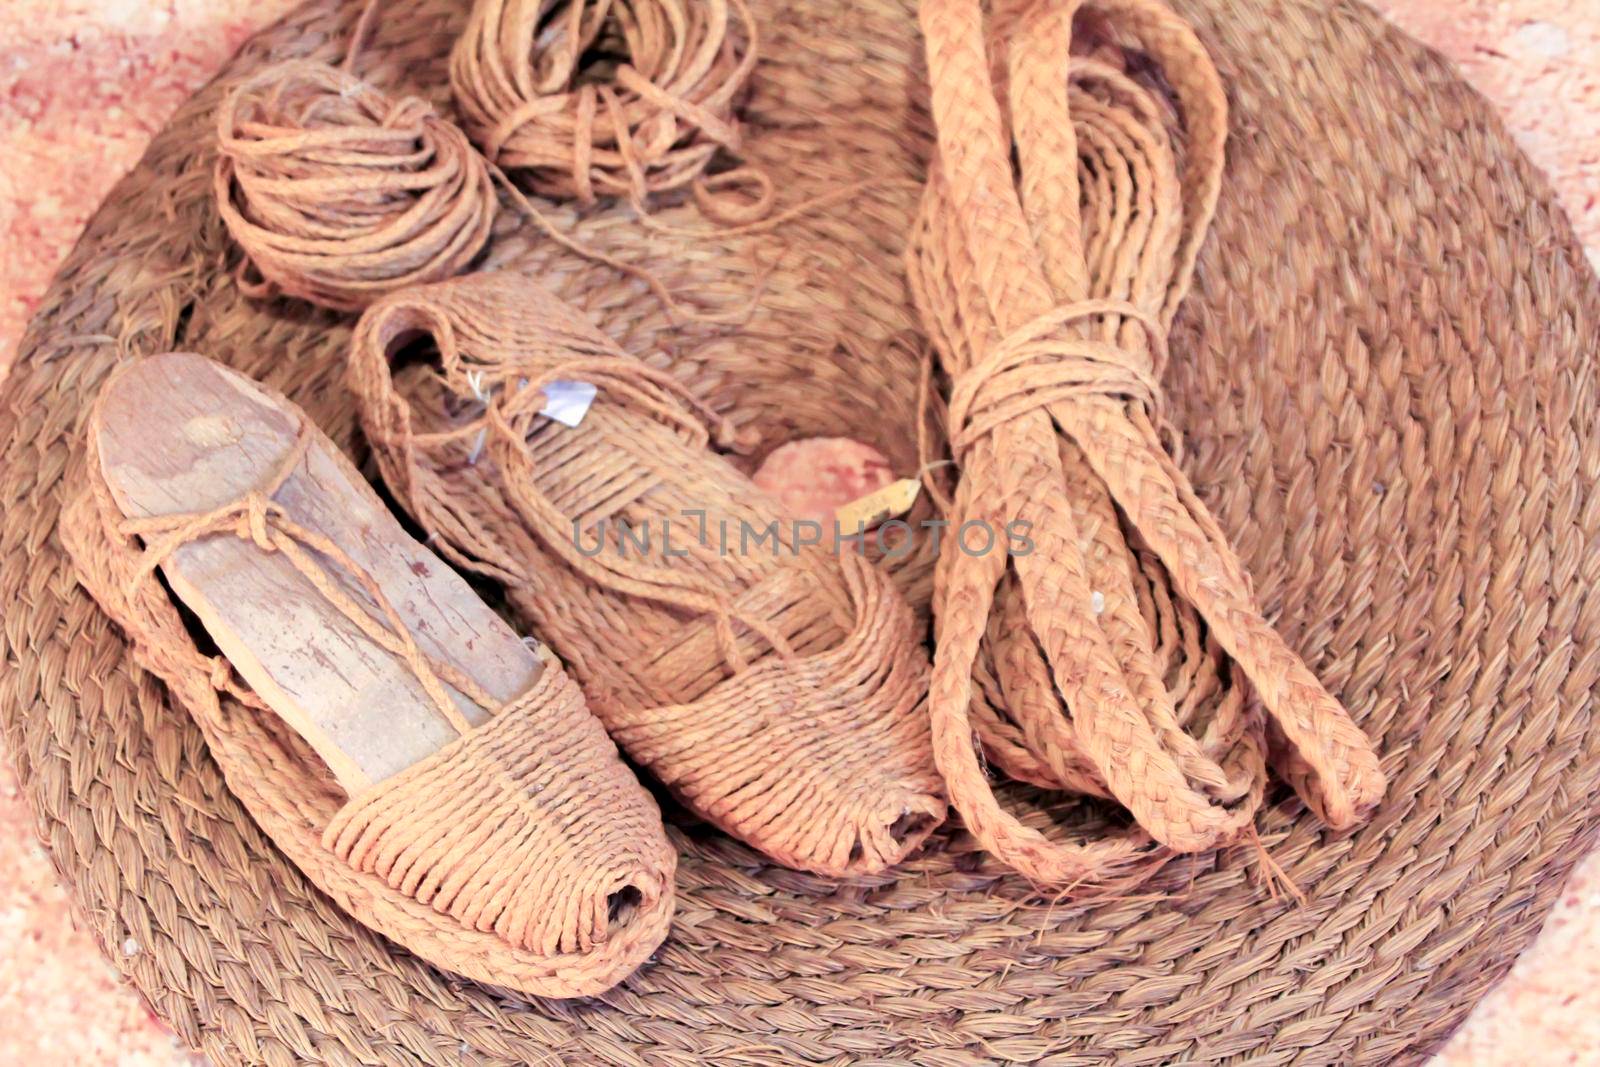 Espadrilles made of esparto grass for sale in a basket